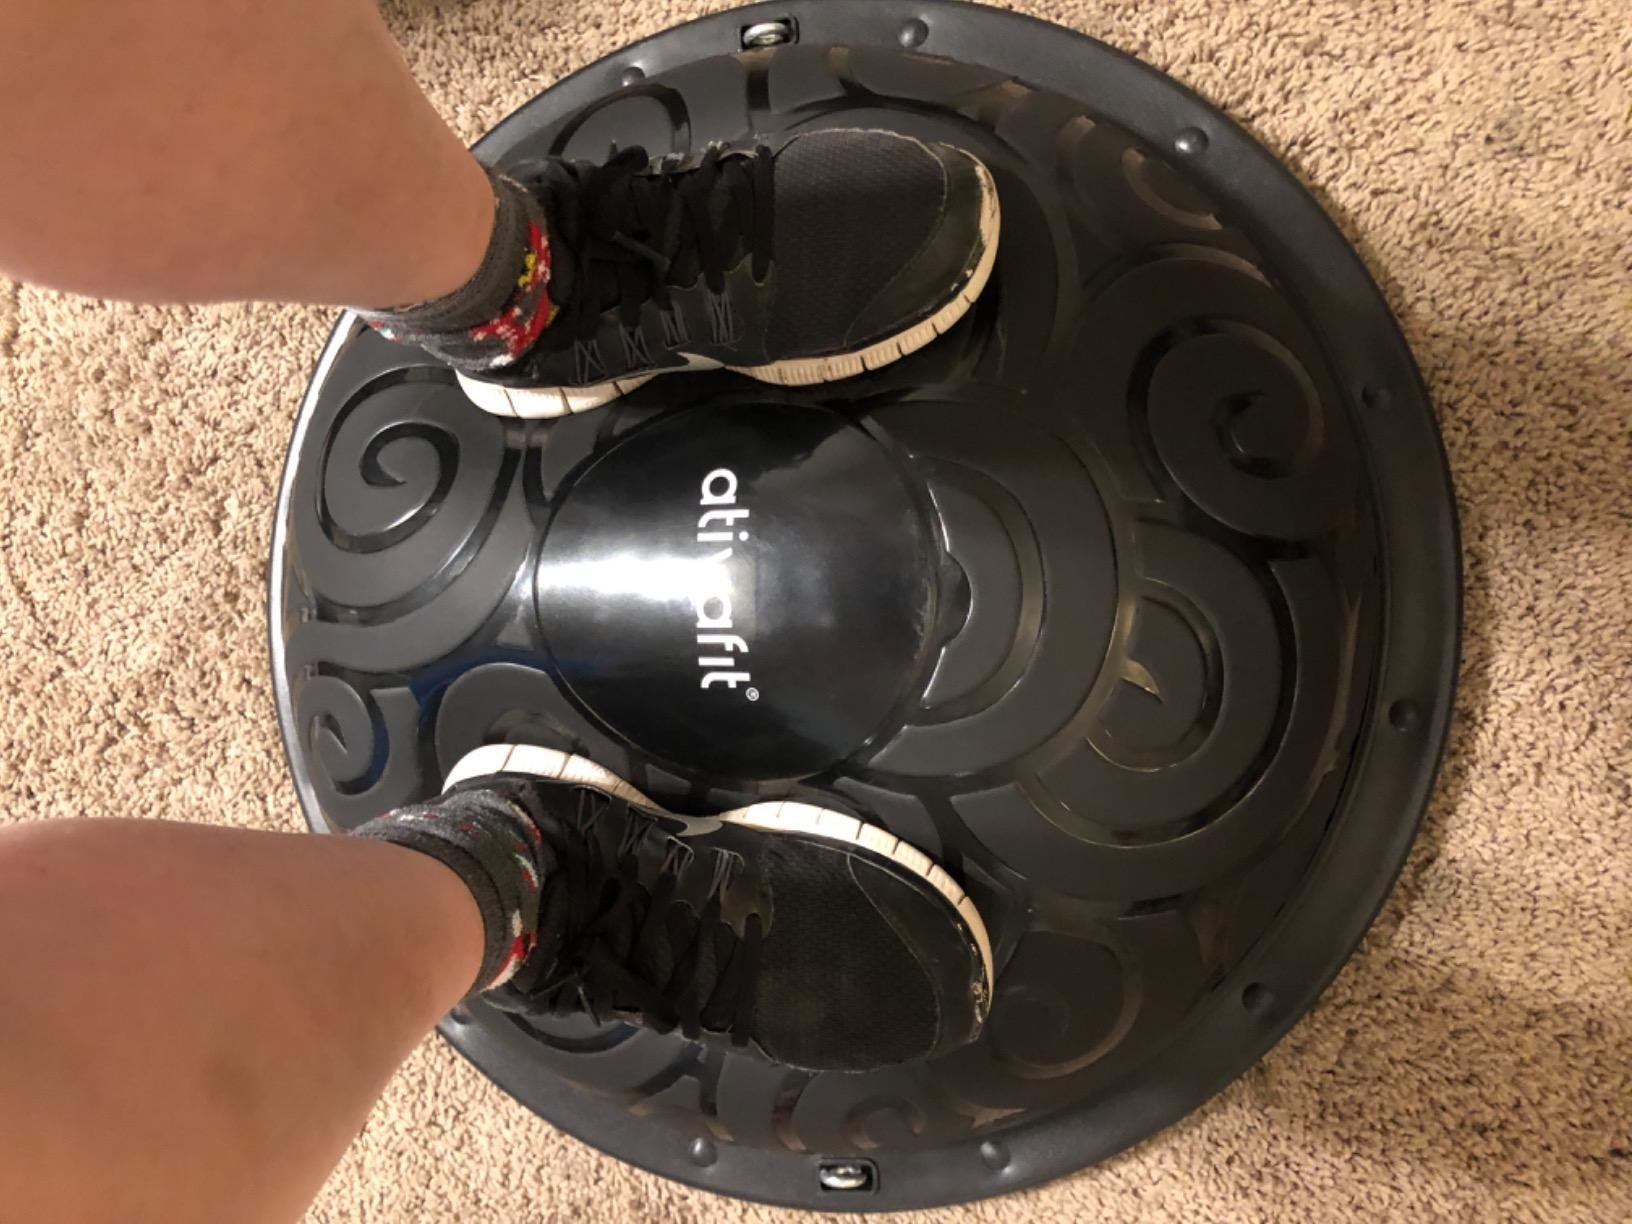 Reviewer stands on black balance ball trainer placed on tan carpet